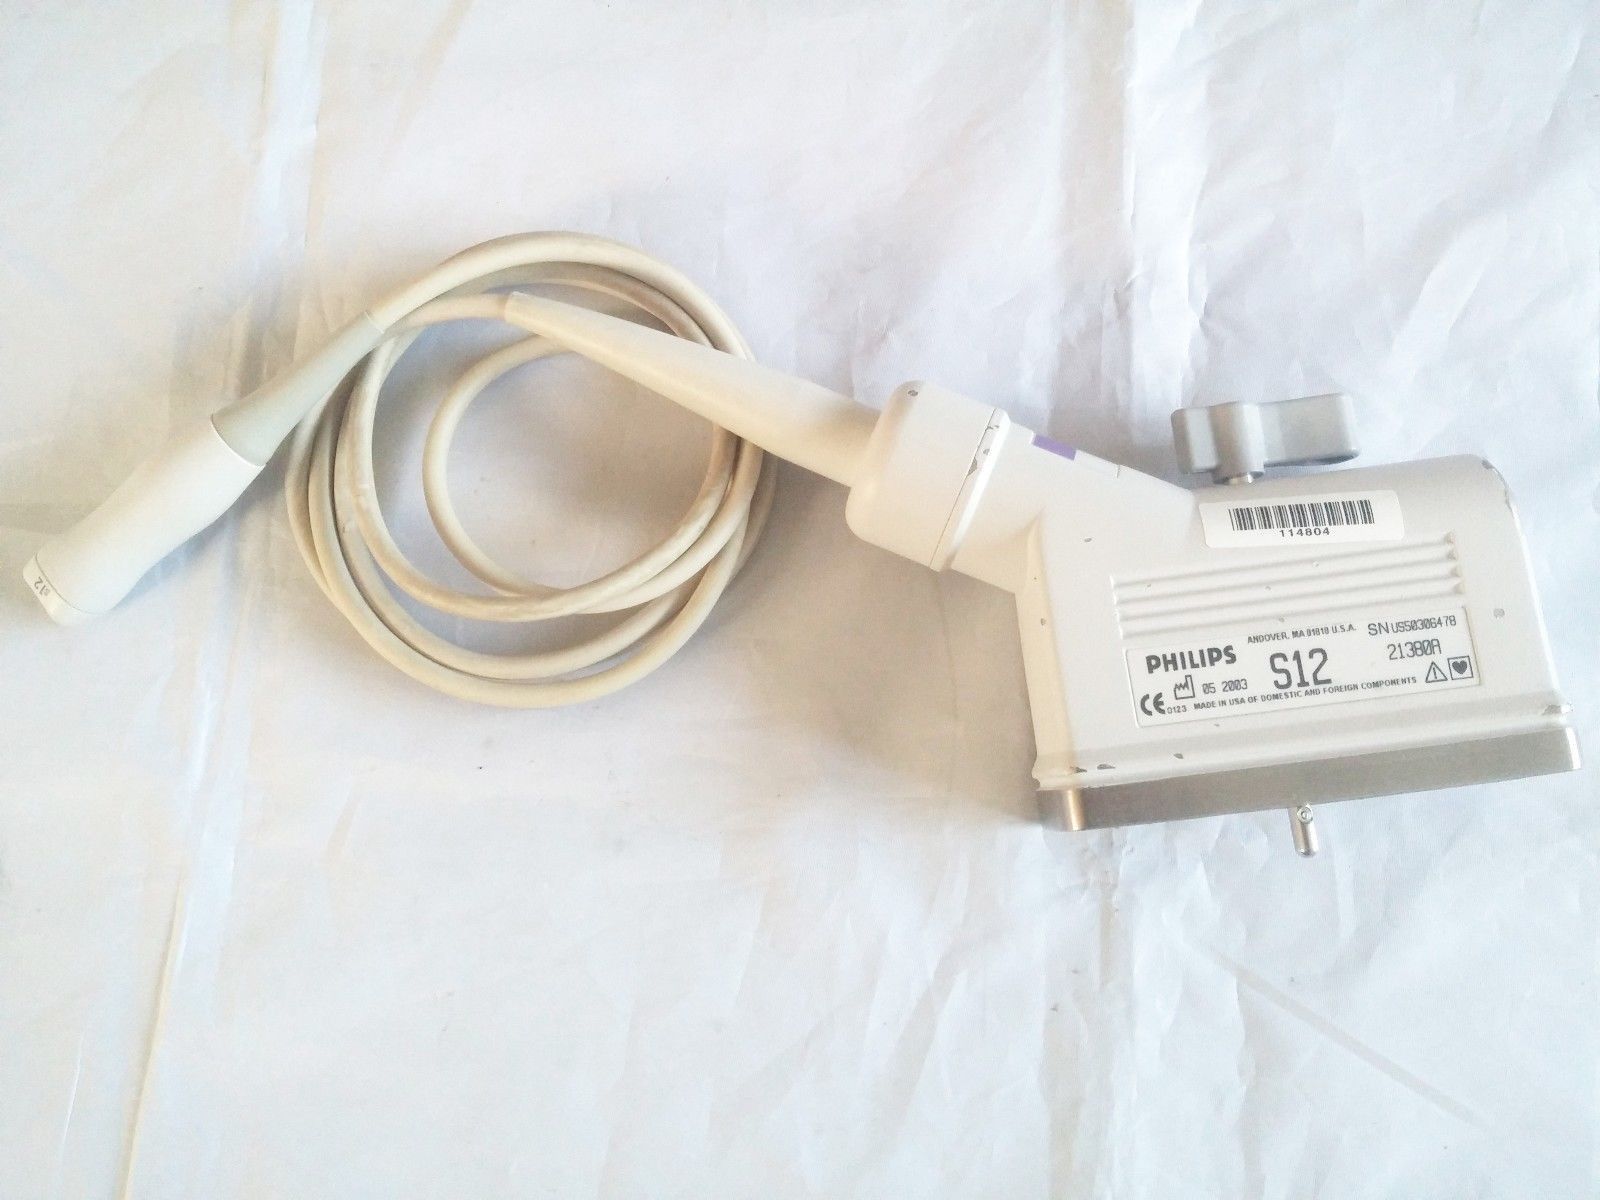 a white cord connected to a device on a white sheet